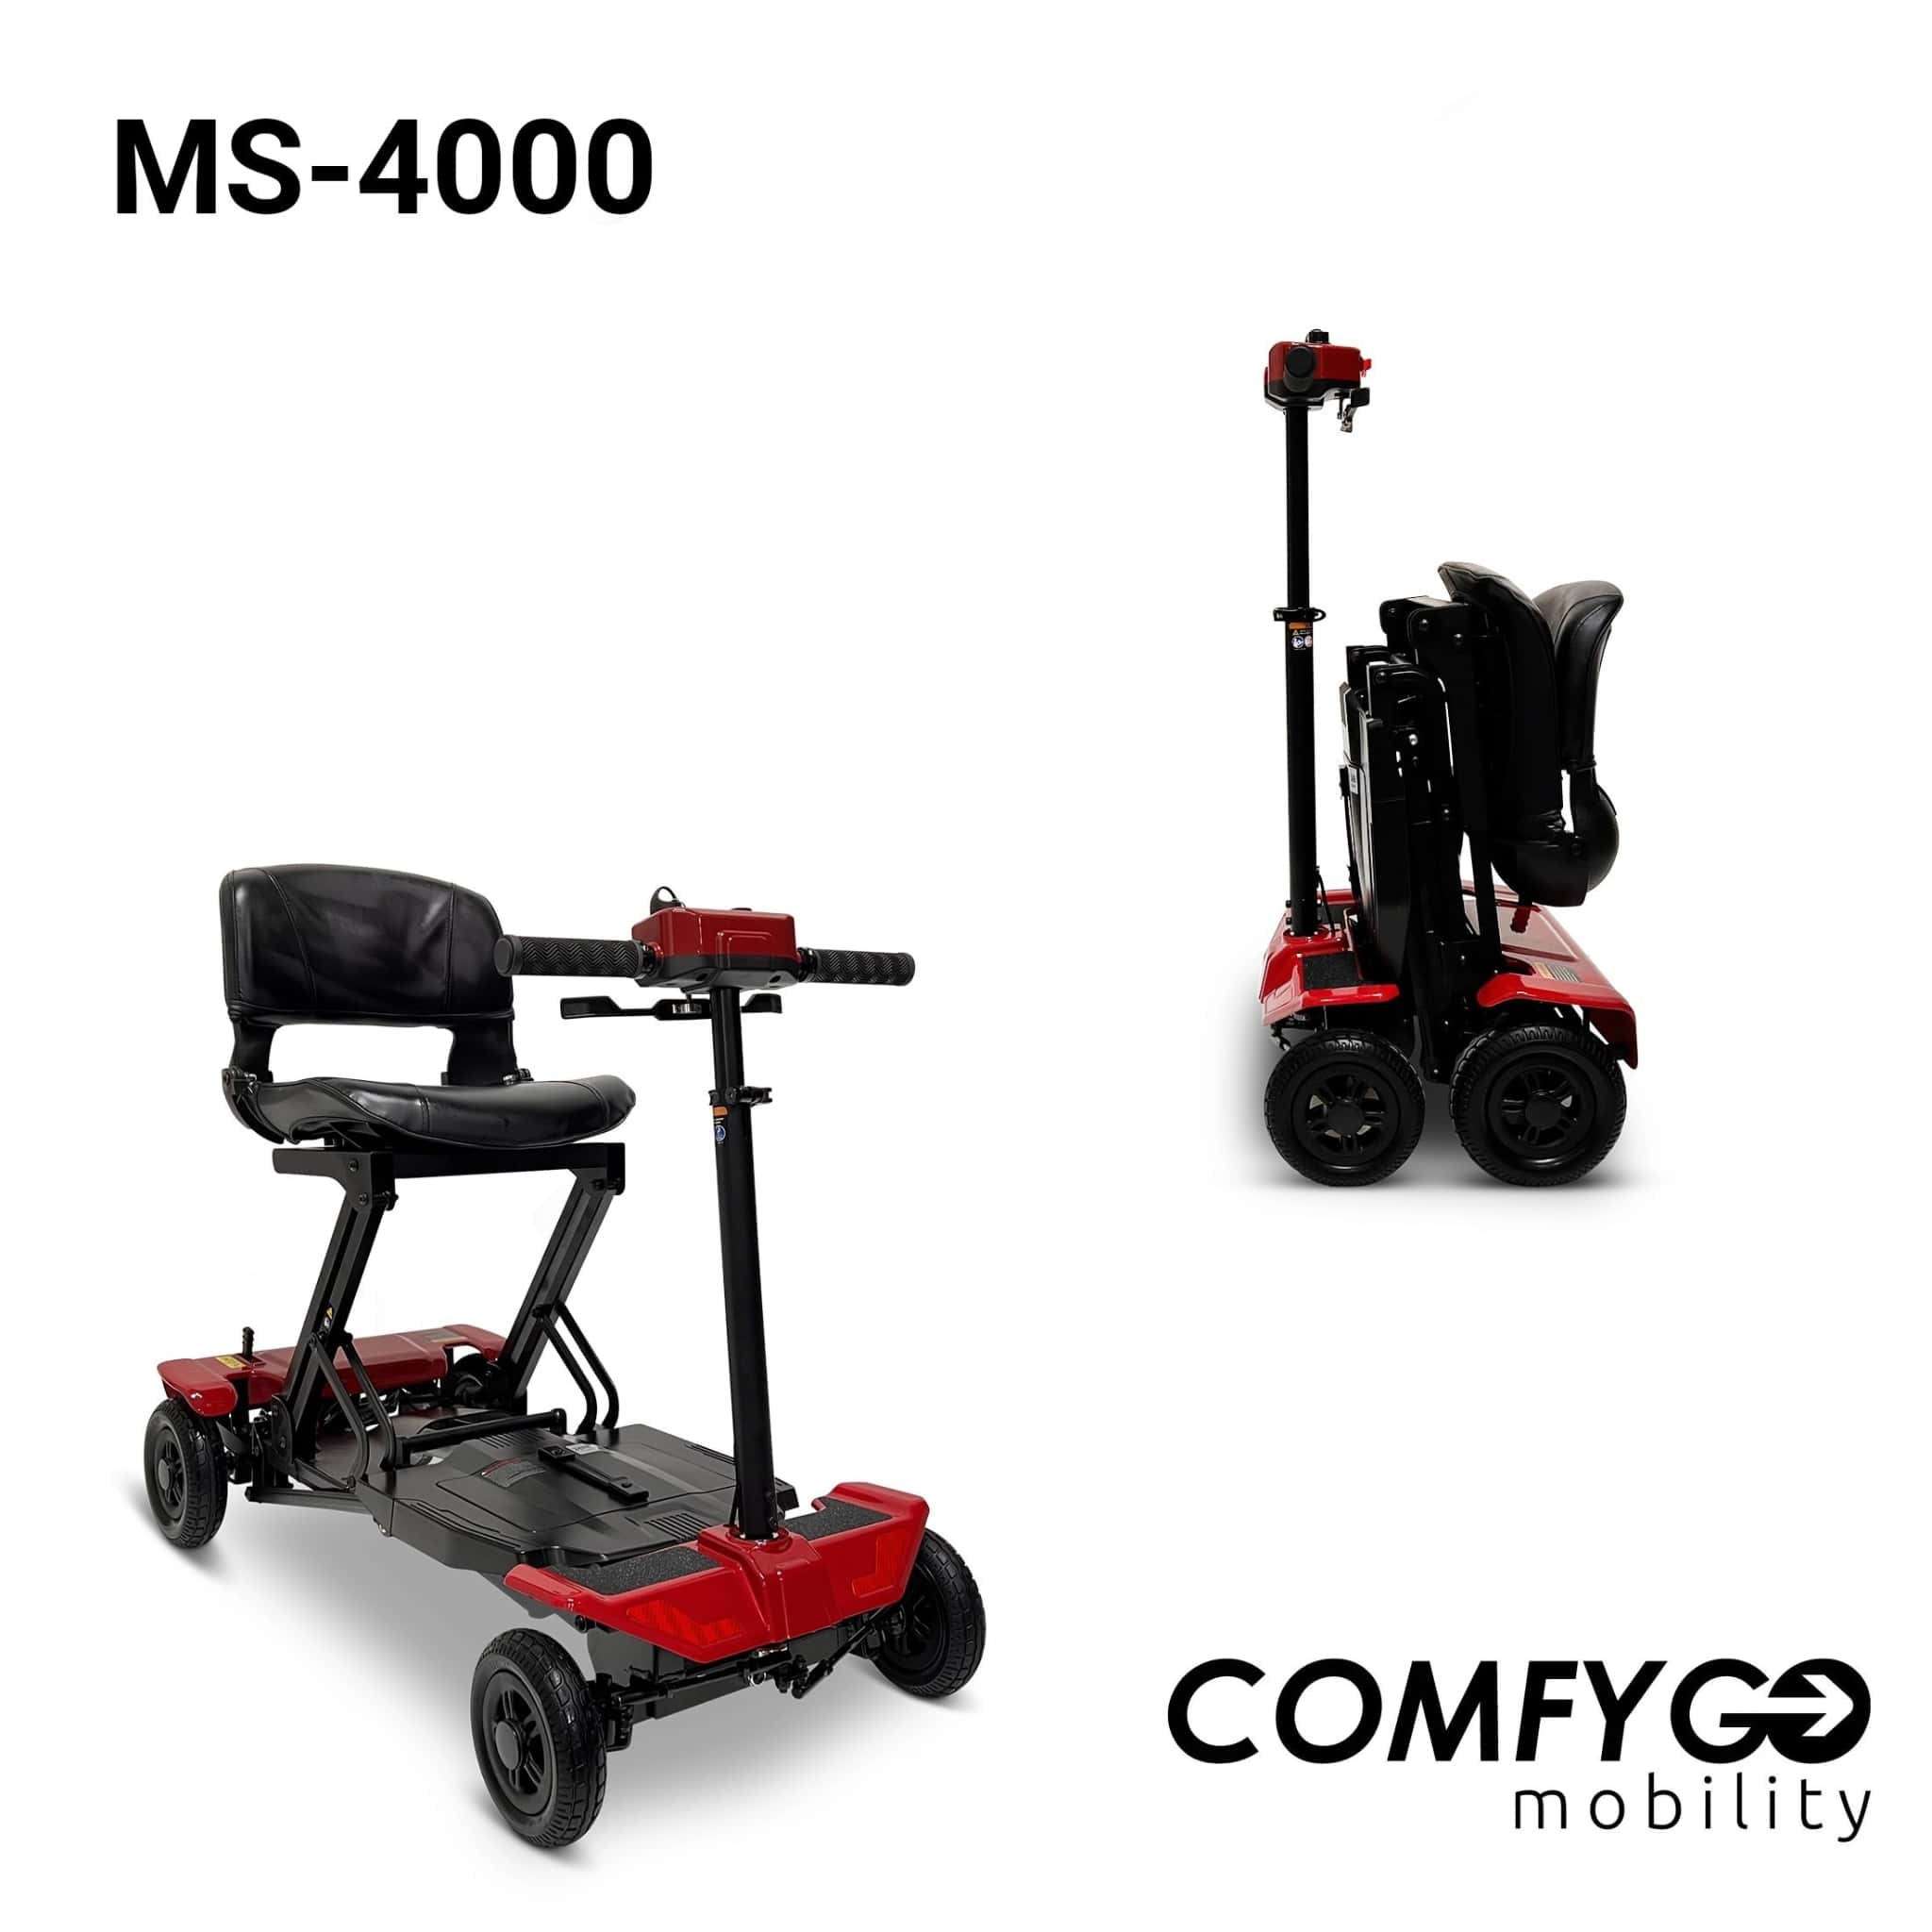 MS-4000 4-Wheel Mobility Electric Scooter